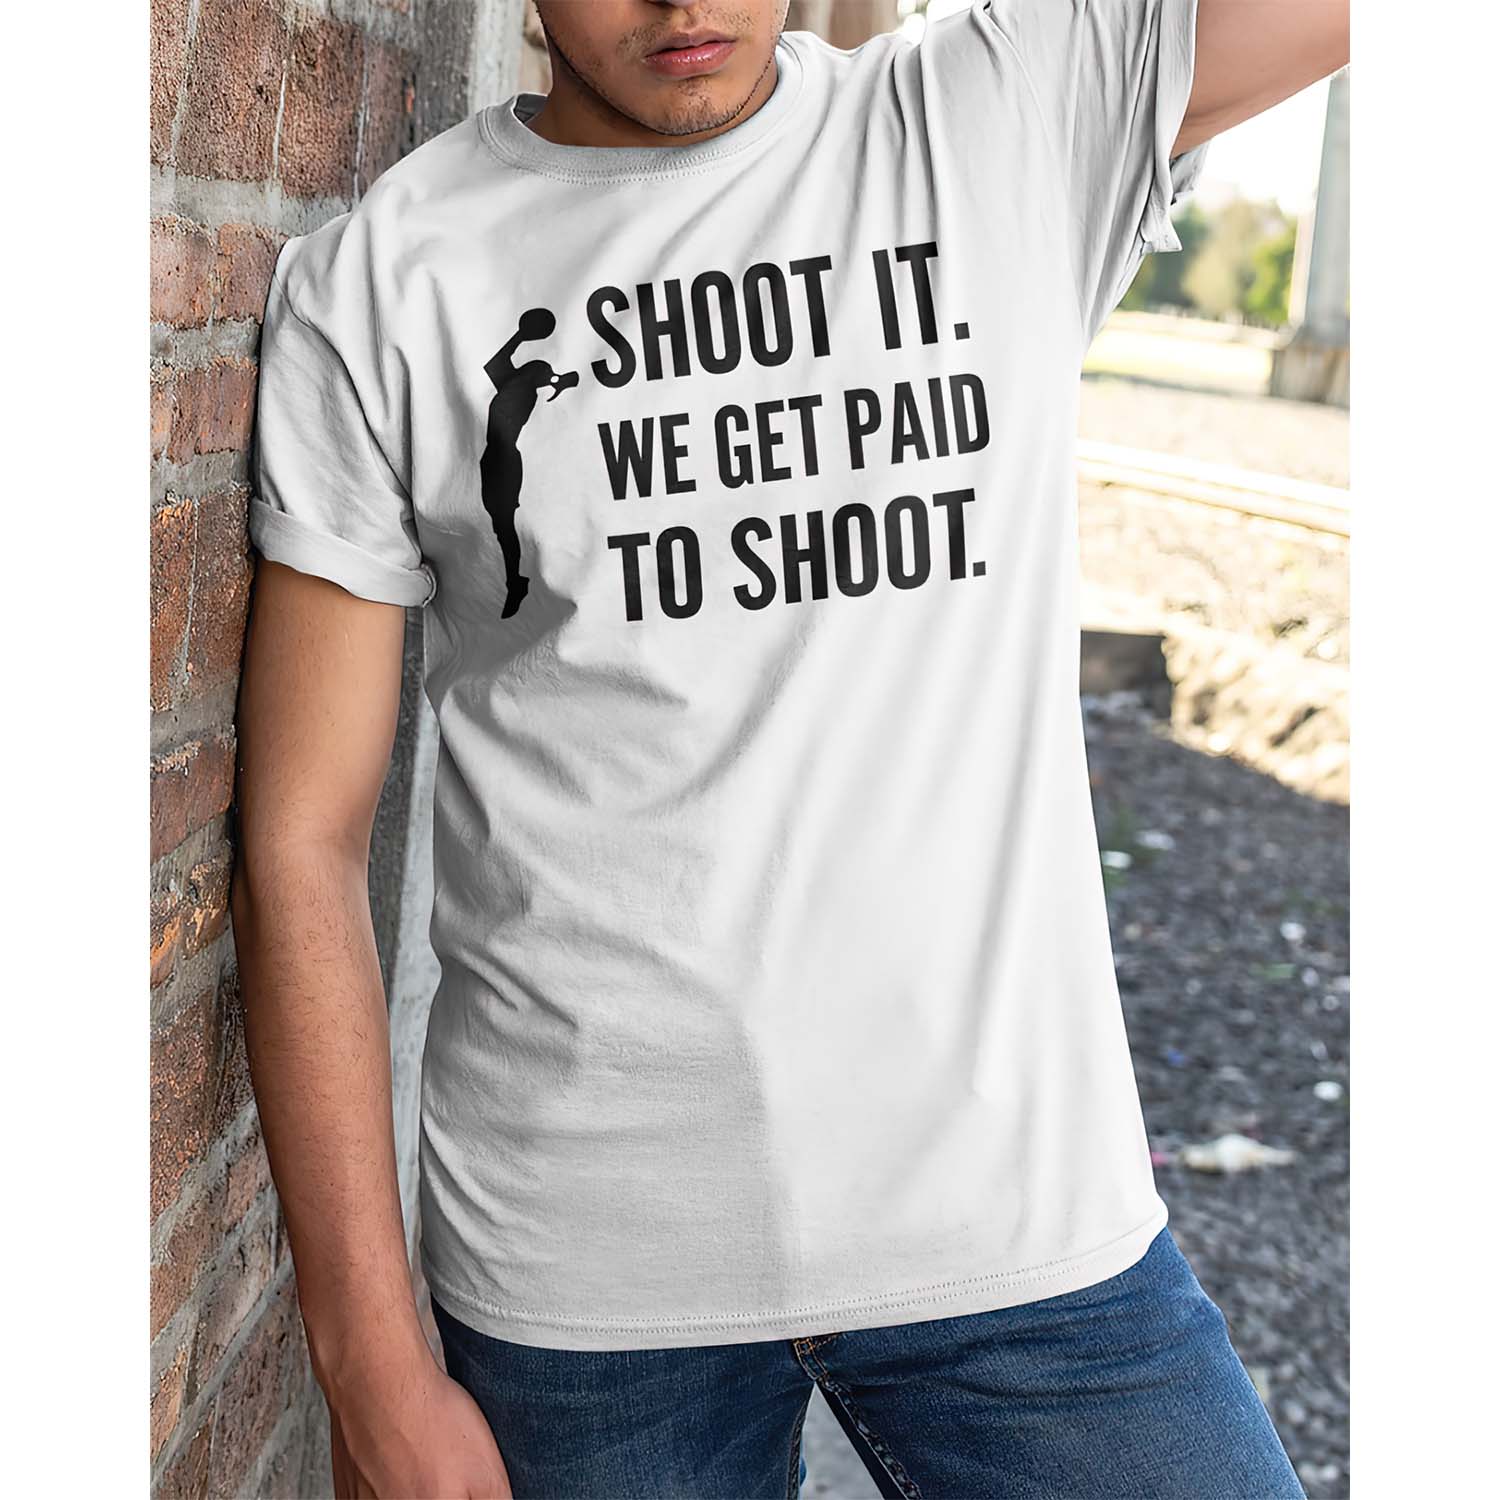 Shoot It We Get Paid To Shoot Shirt